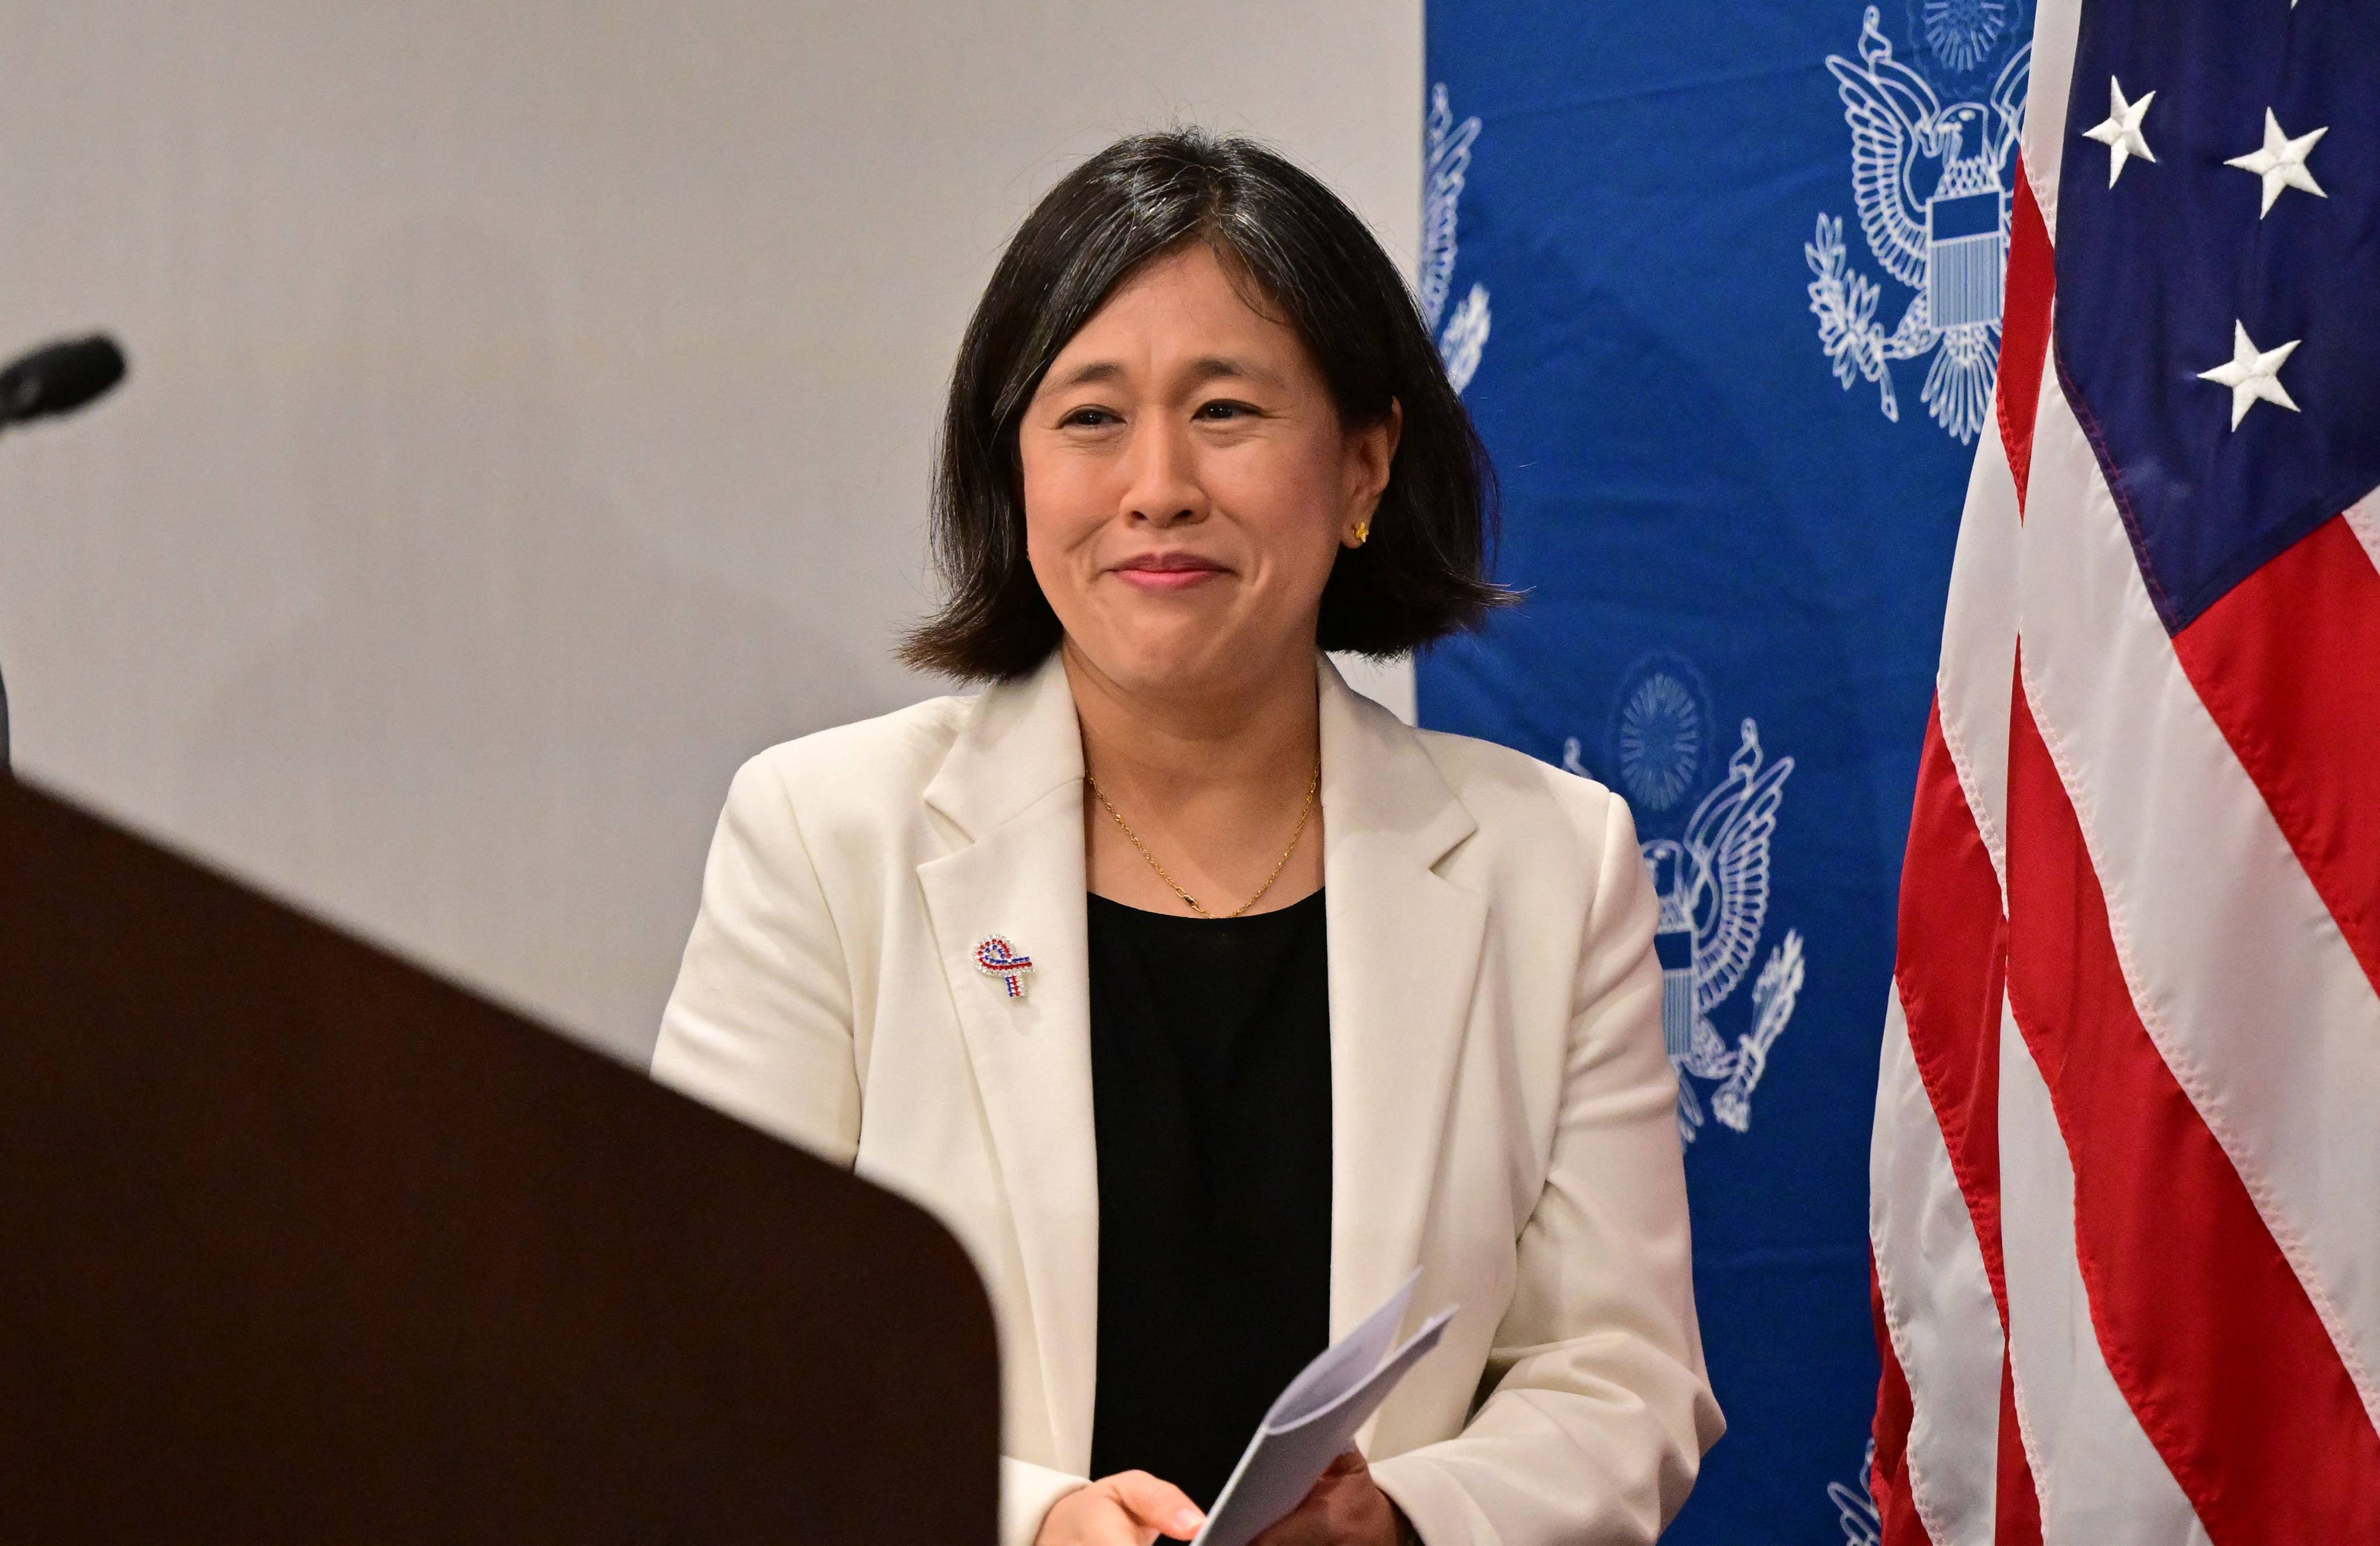 US Trade Representative Katherine Tai says China “continues to use unfair, non-market policies and practices to undermine fair competition”. Photo: AFP